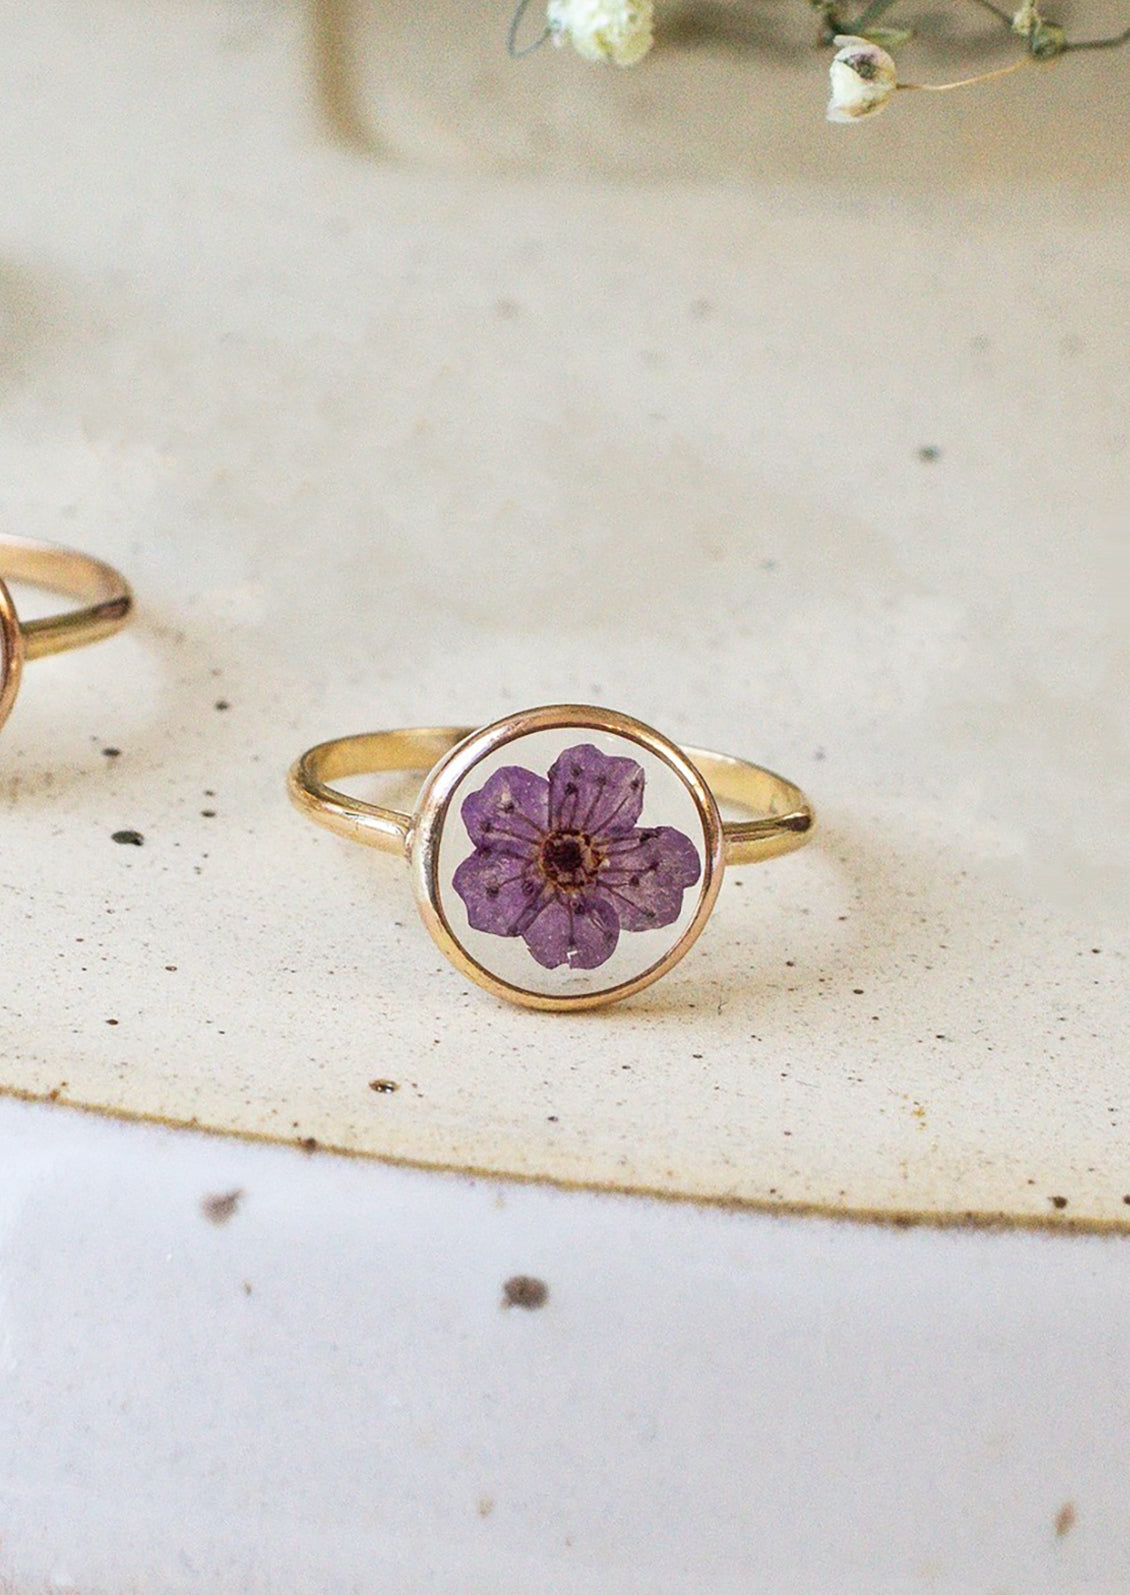 A gold round bezel ring showing purple flower on clear background.